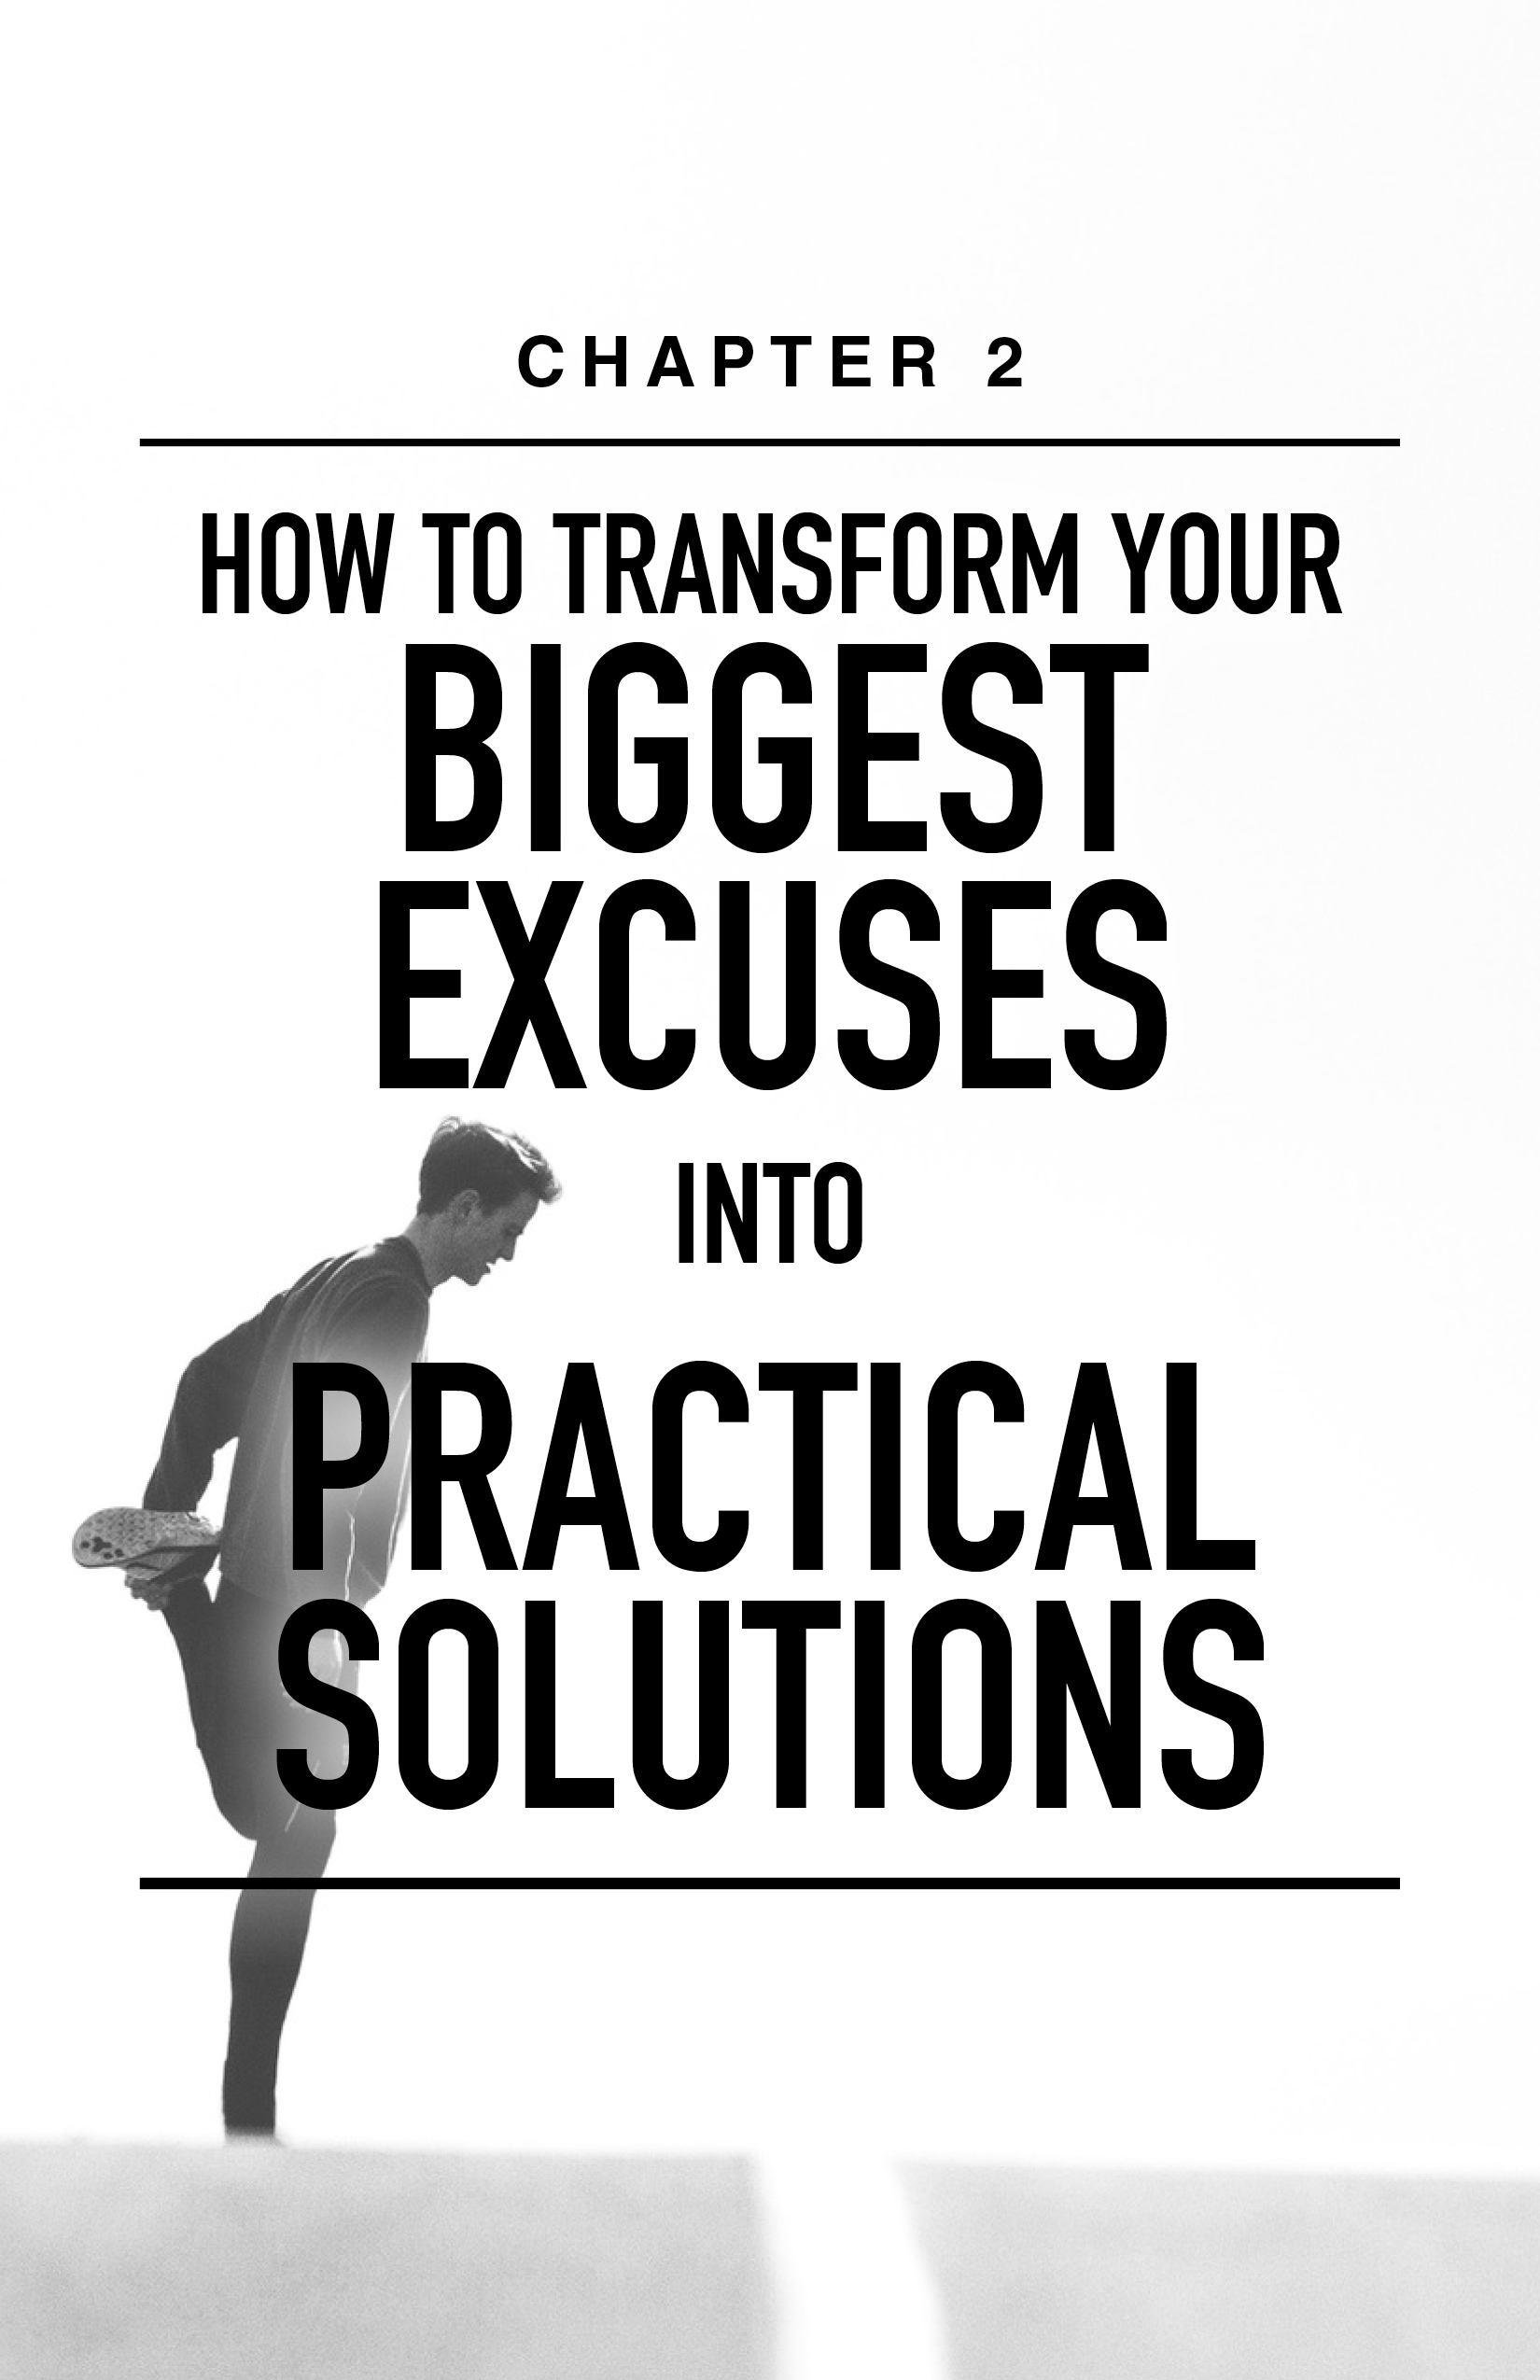 CH 2: How To Transform Your Biggest Excuses Into Practical Solutions